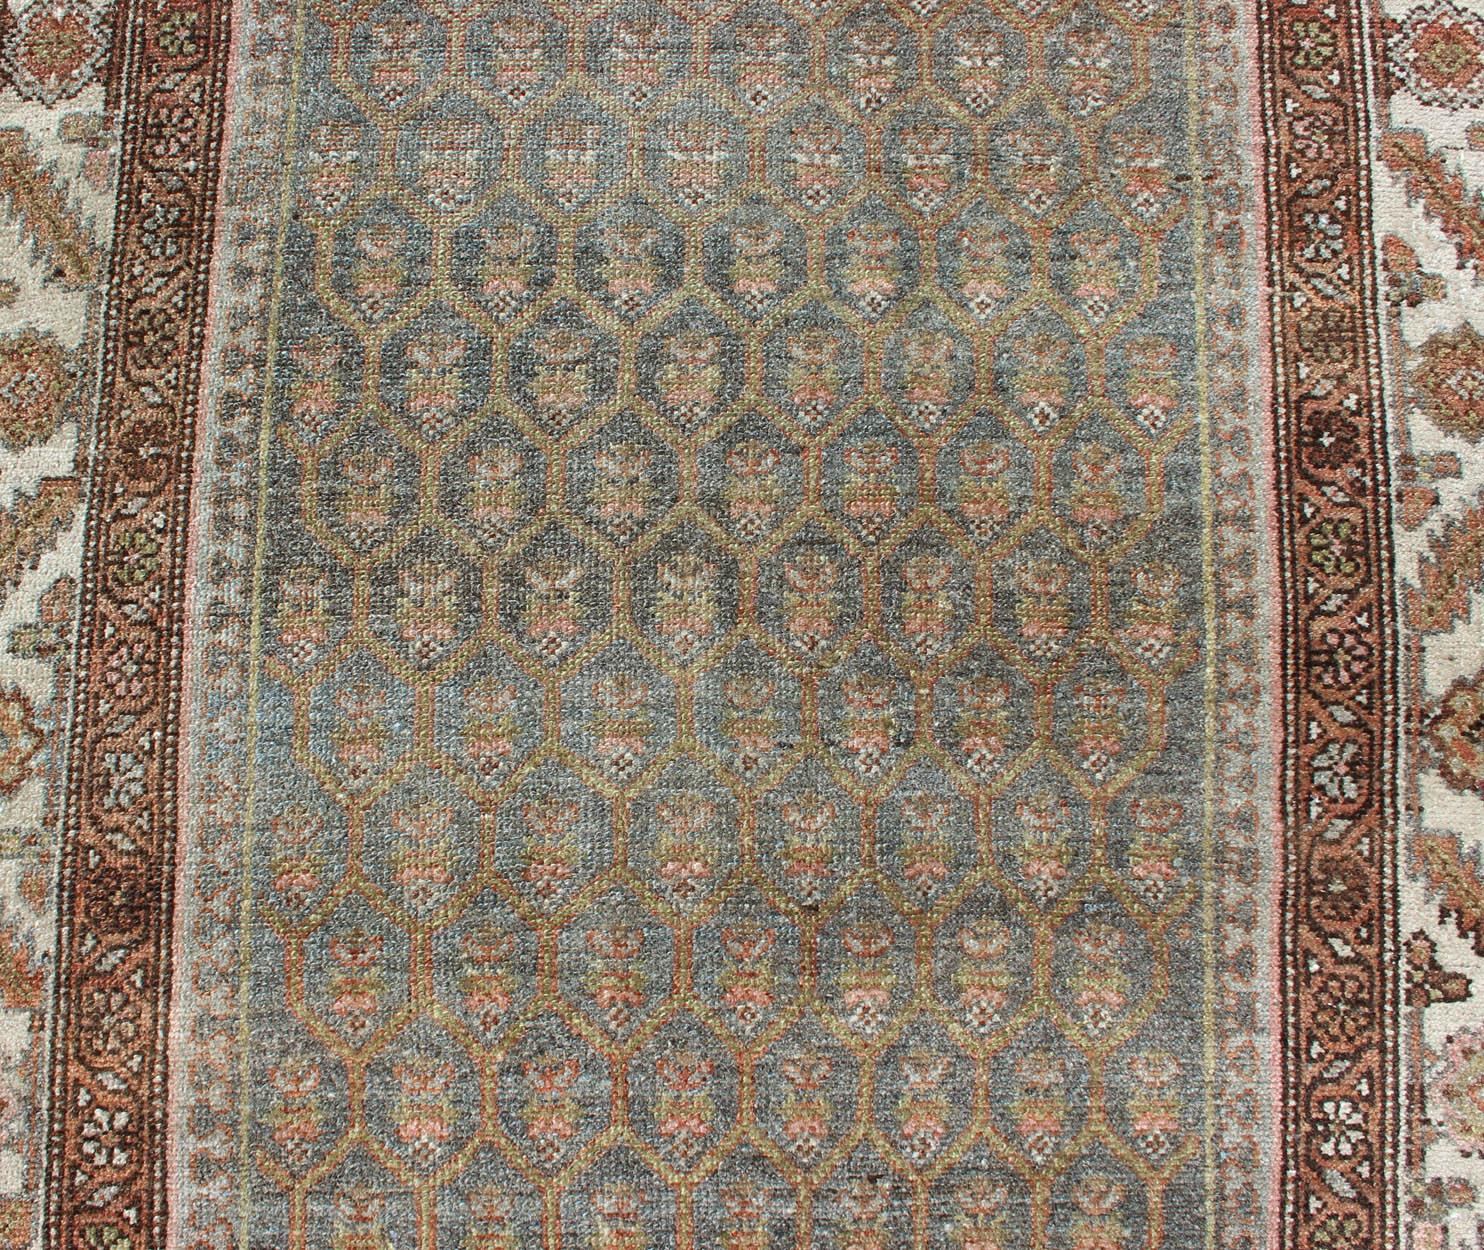 Early 20th Century Antique Persian Hamedan Wide Runner with All-Over Design in Unique Color Tone